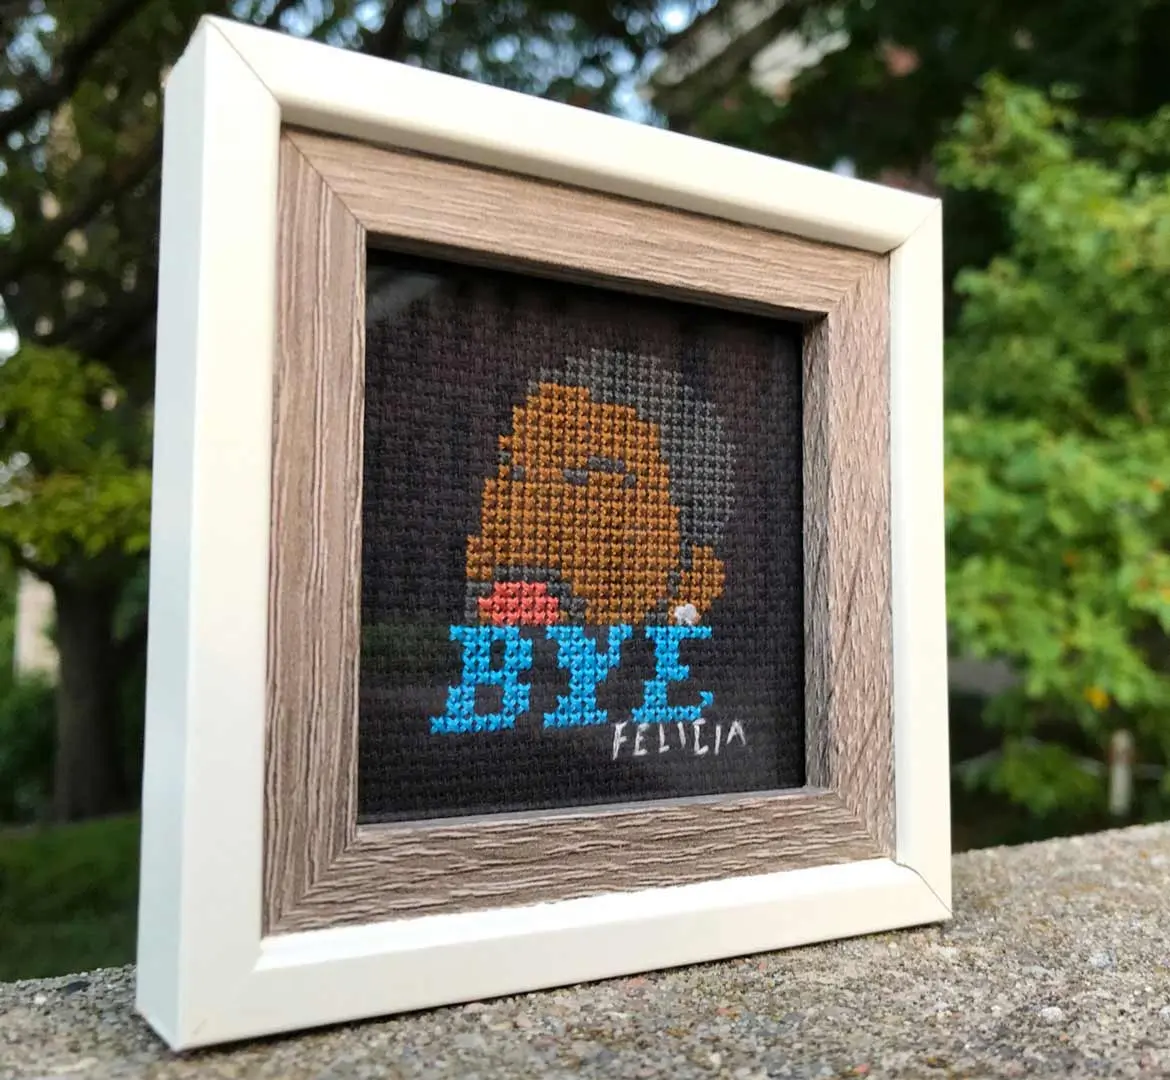 Framed cross stitch design of Ice Cube in “Friday” above words “Bye, Felicia” on black Aida fabric